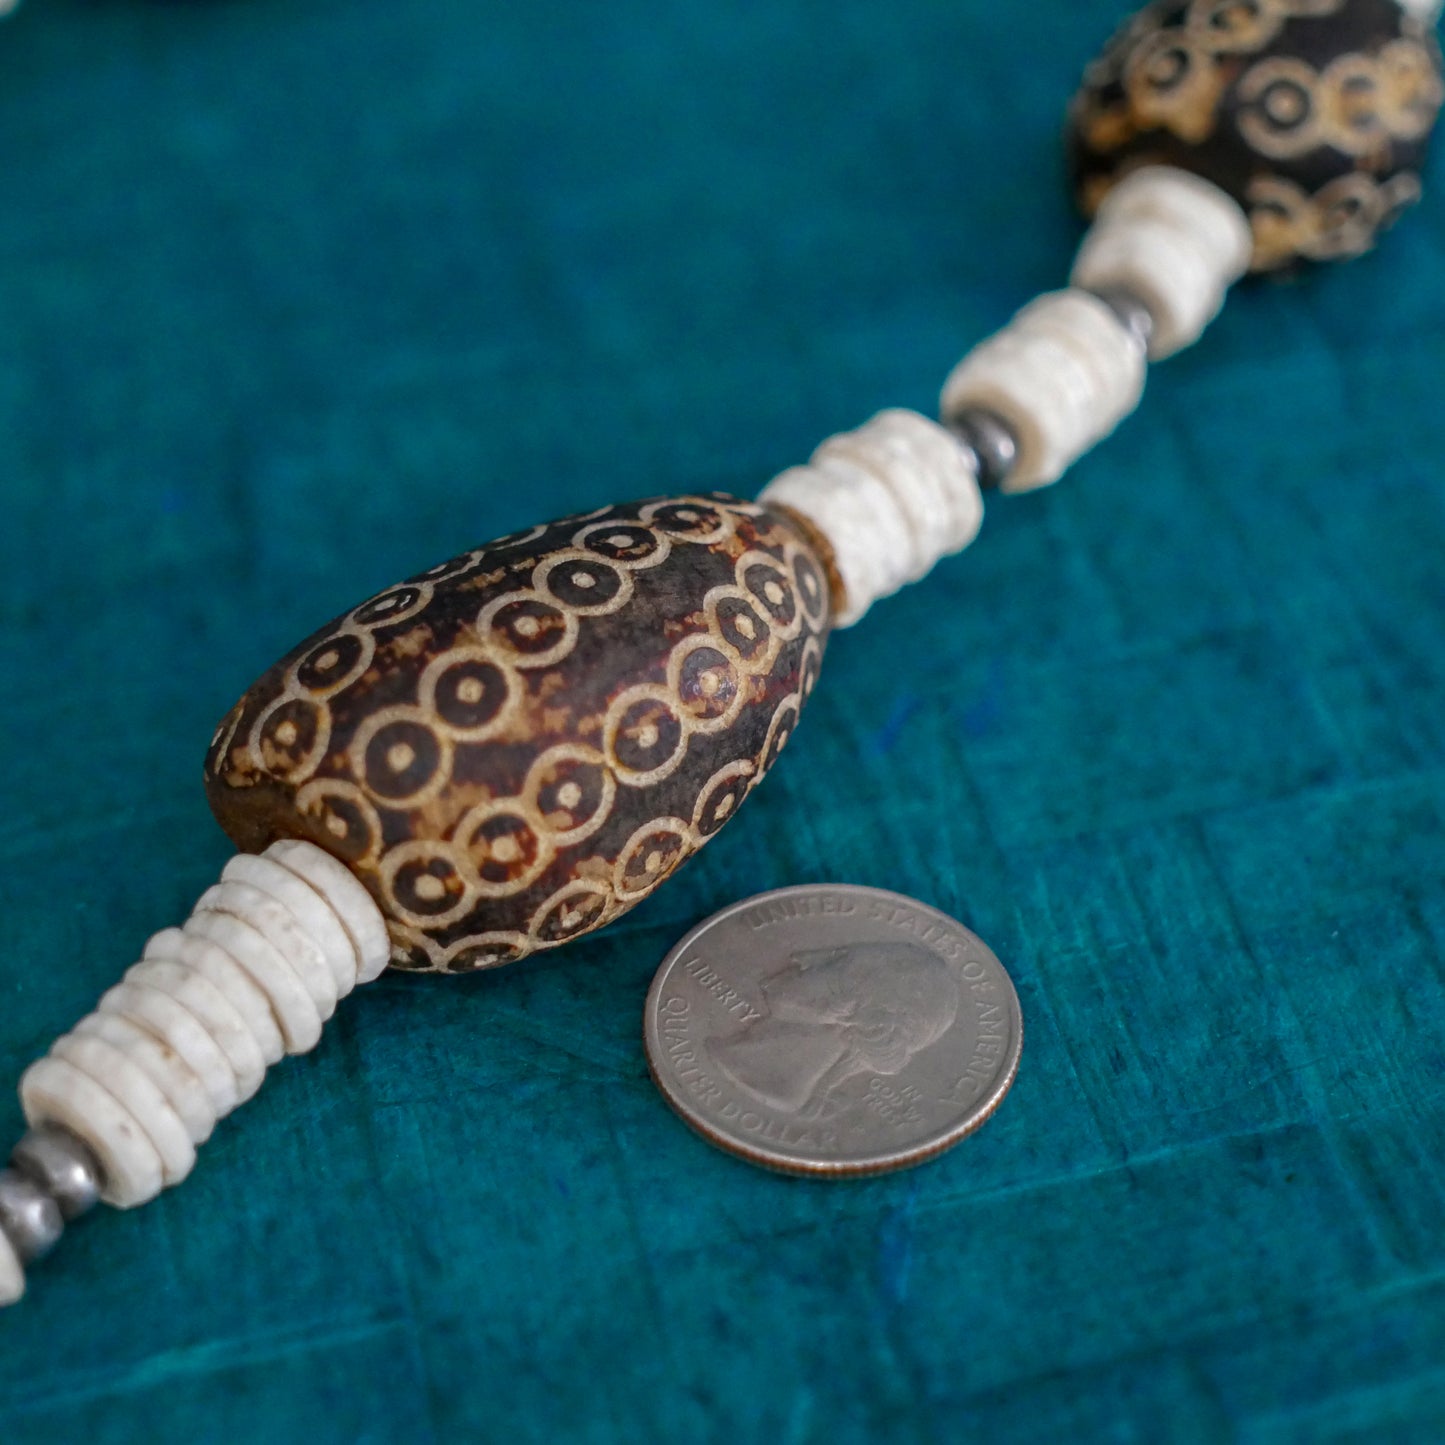 African Tribal Beads Necklace | Chunky Beads | Fashion Vintage Jewelry